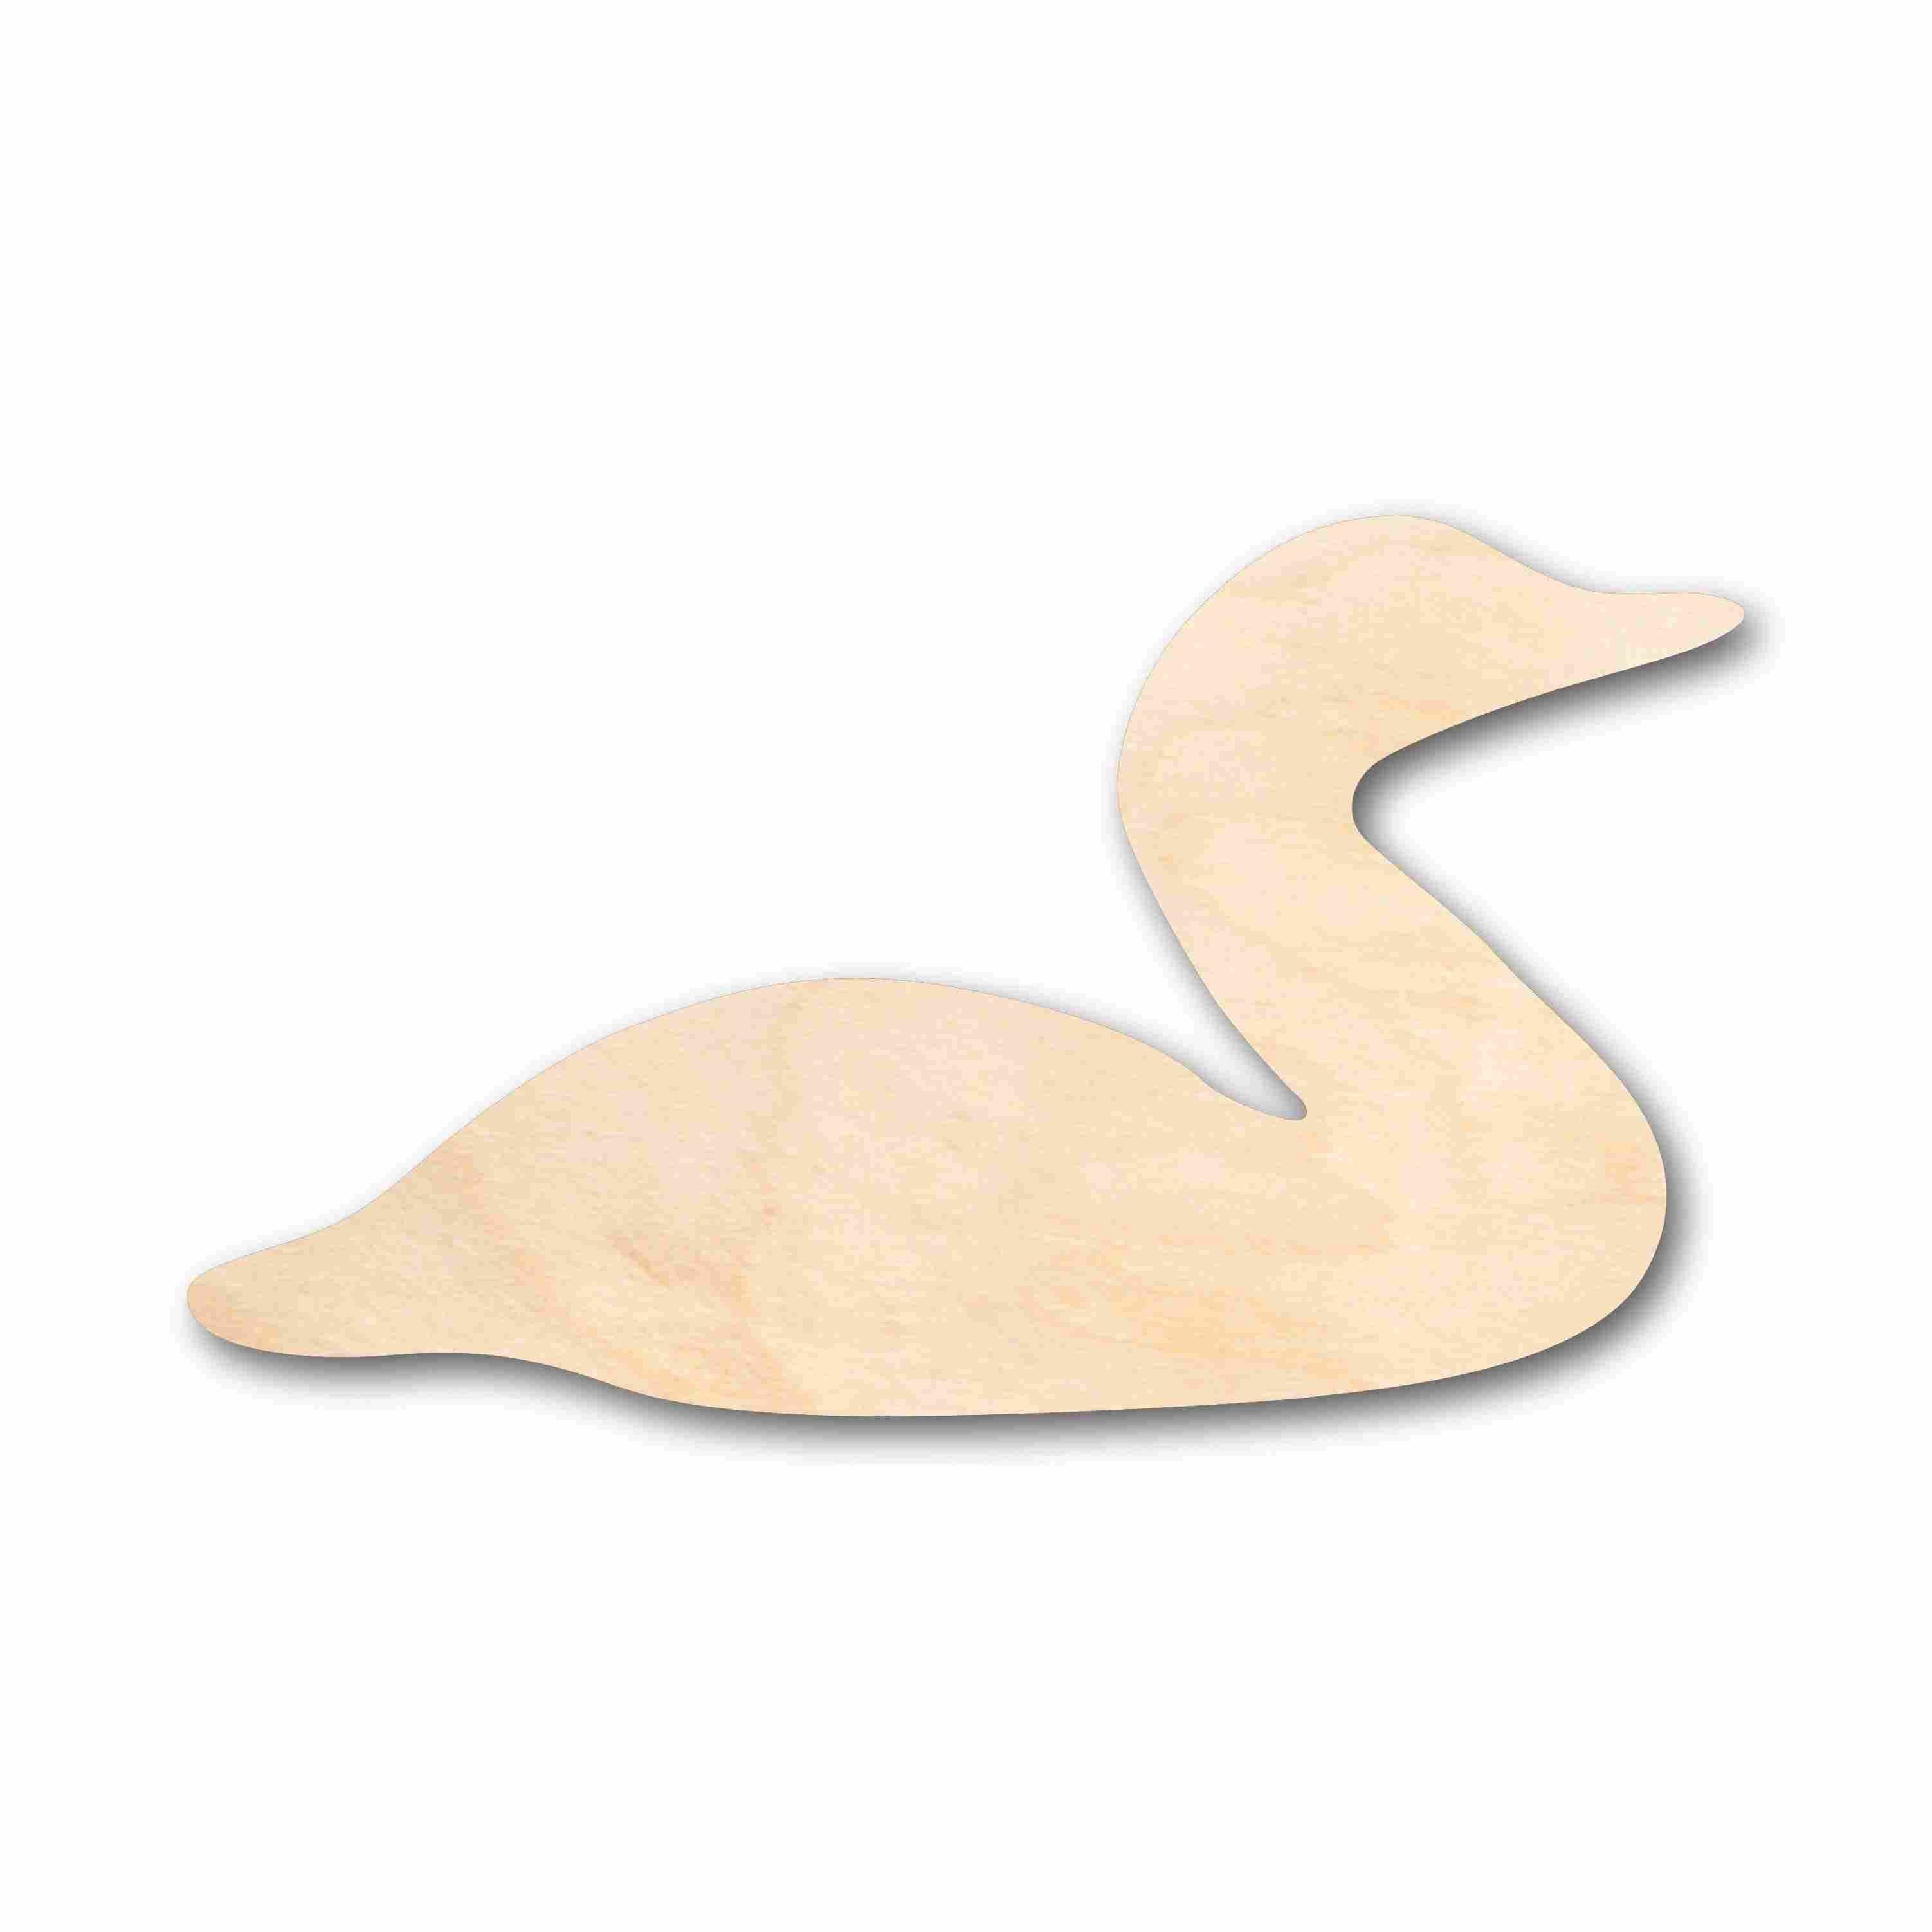 Unfinished Wood Loon Silhouette - Craft- up to 24